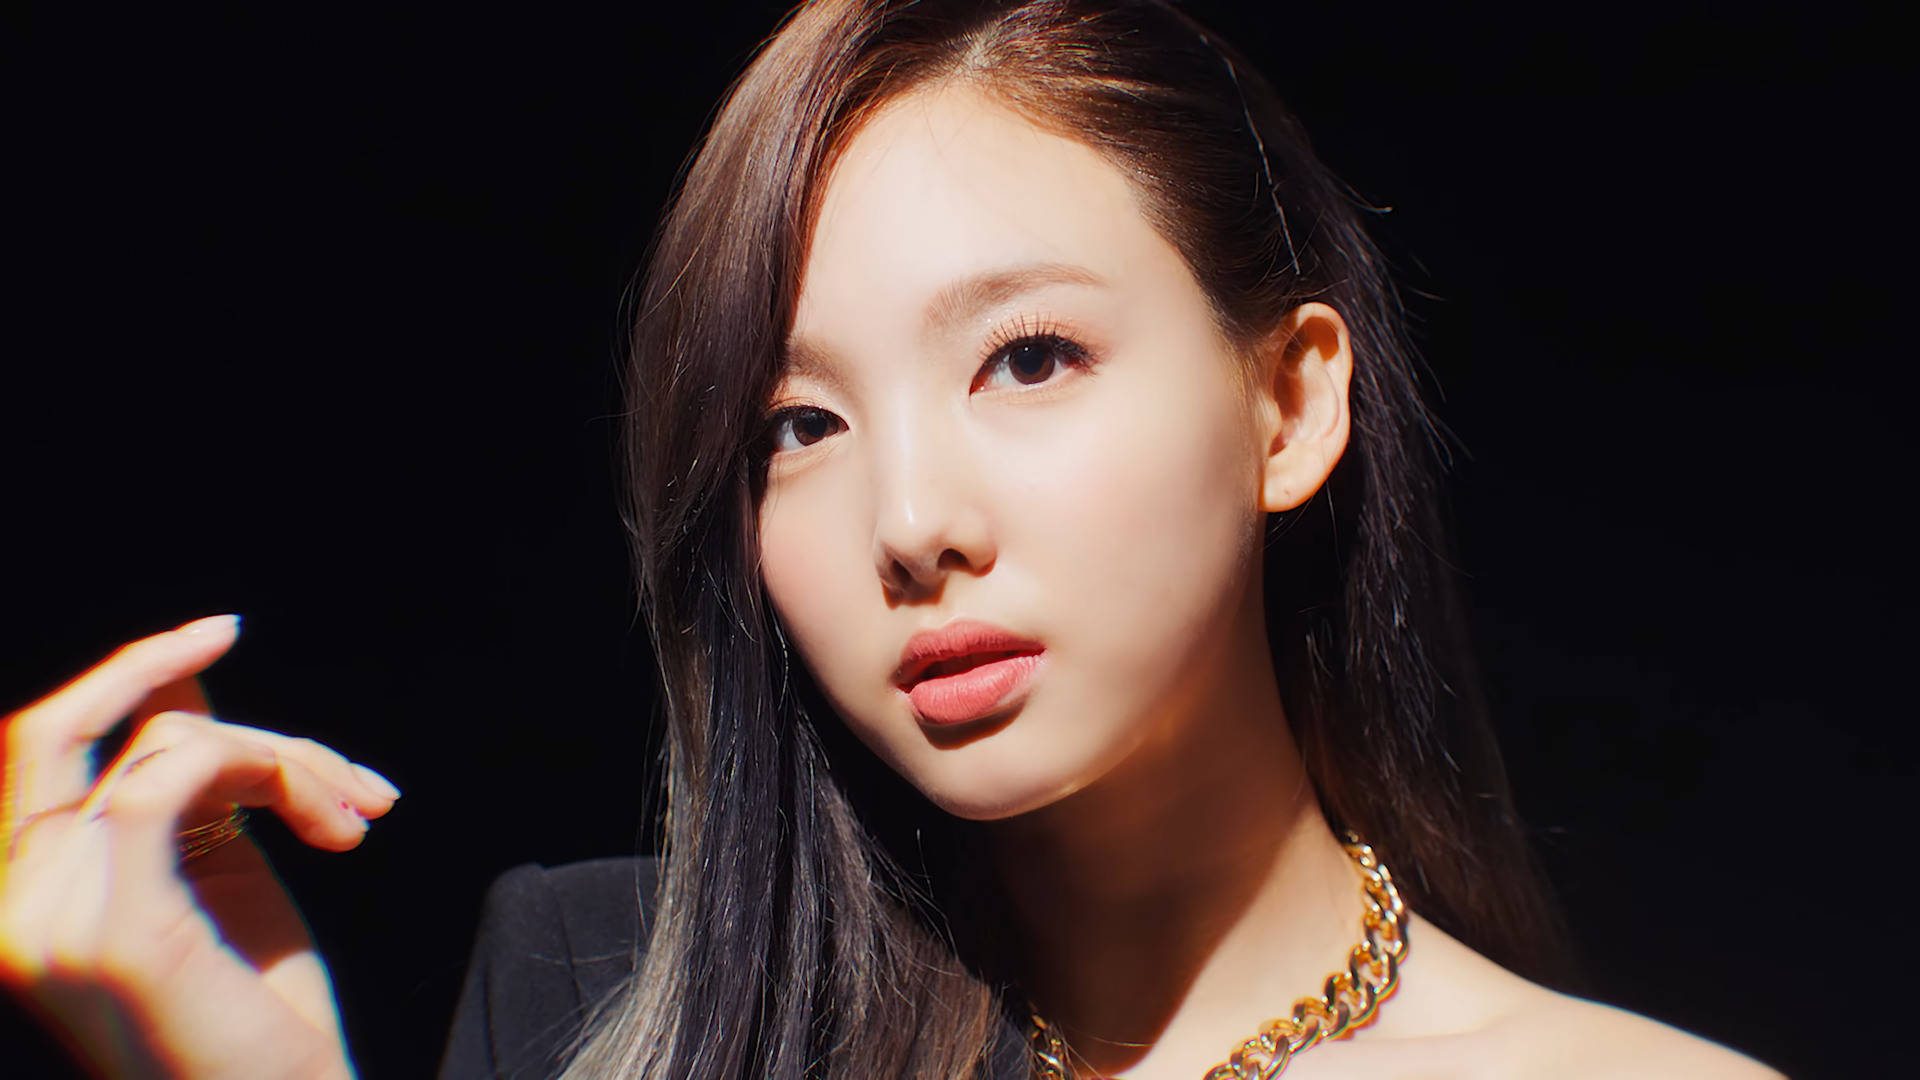 Tvågånger Nayeon Med Klippt Hår. (this Would Be A Suitable Translation For A Description Of A Computer Or Mobile Wallpaper Featuring The K-pop Singer Nayeon With A New Haircut.) Wallpaper